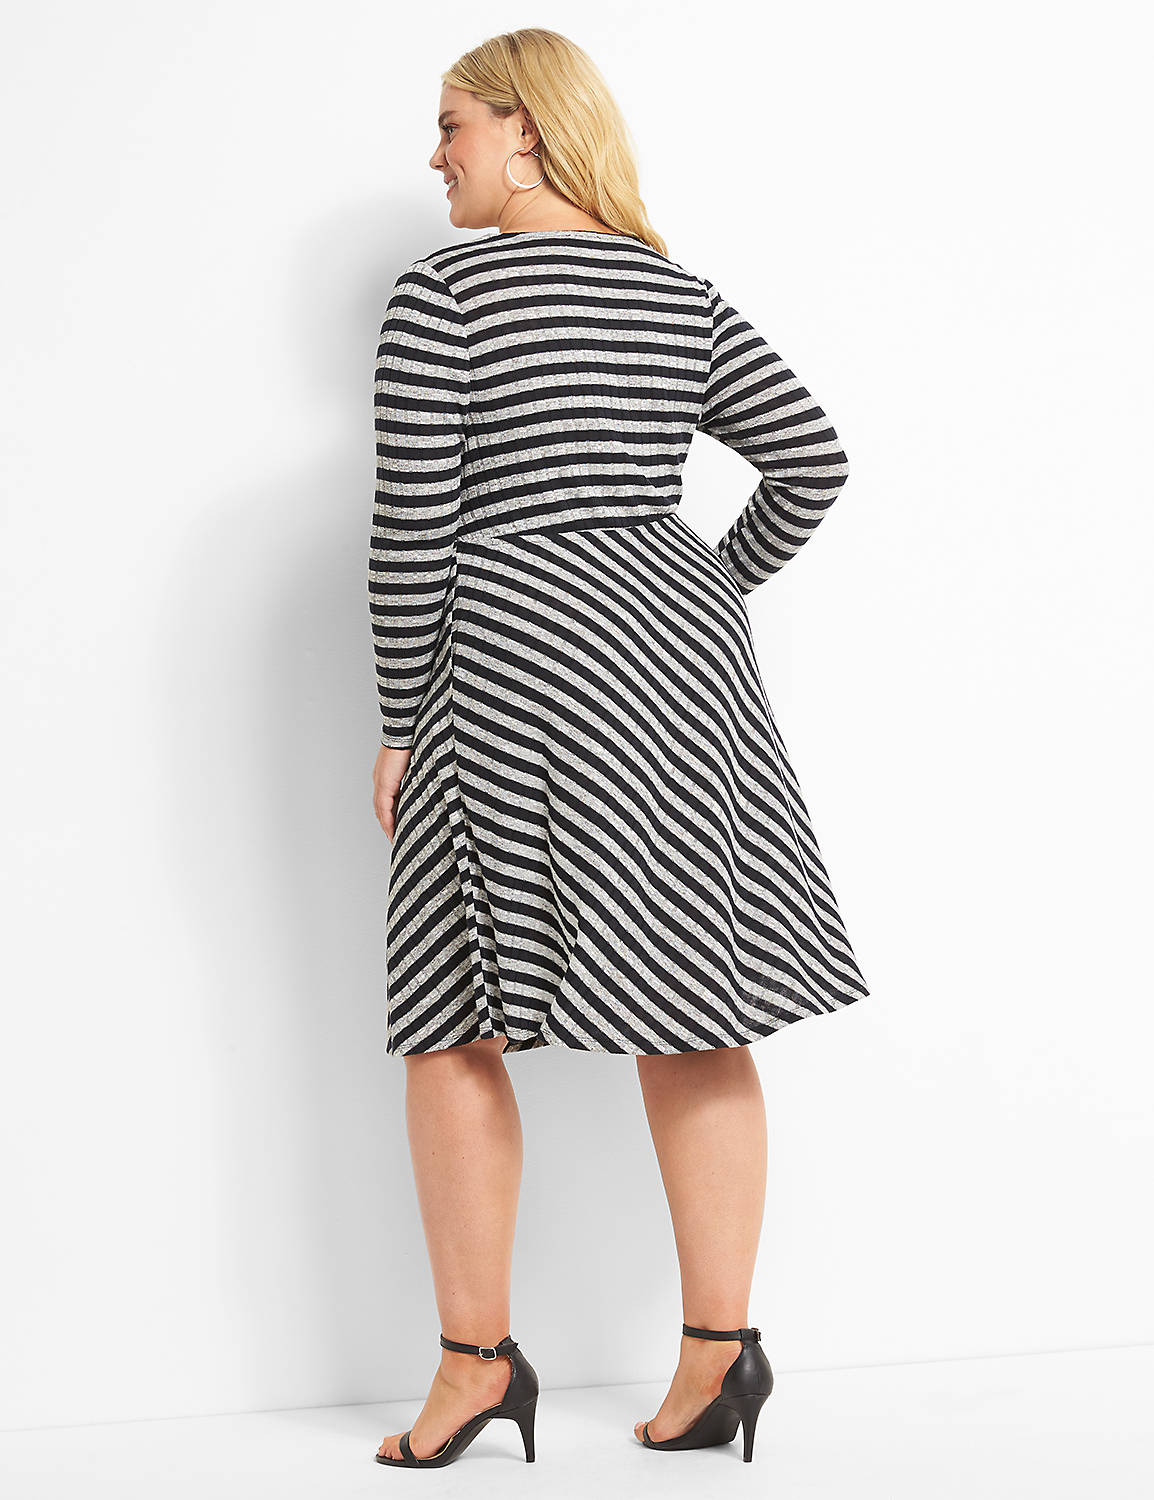 Long Sleeve Surplice Rib Fit and Flare 1122730:LBPS20153_BaileyStripe_colorway1:18/20 Product Image 2